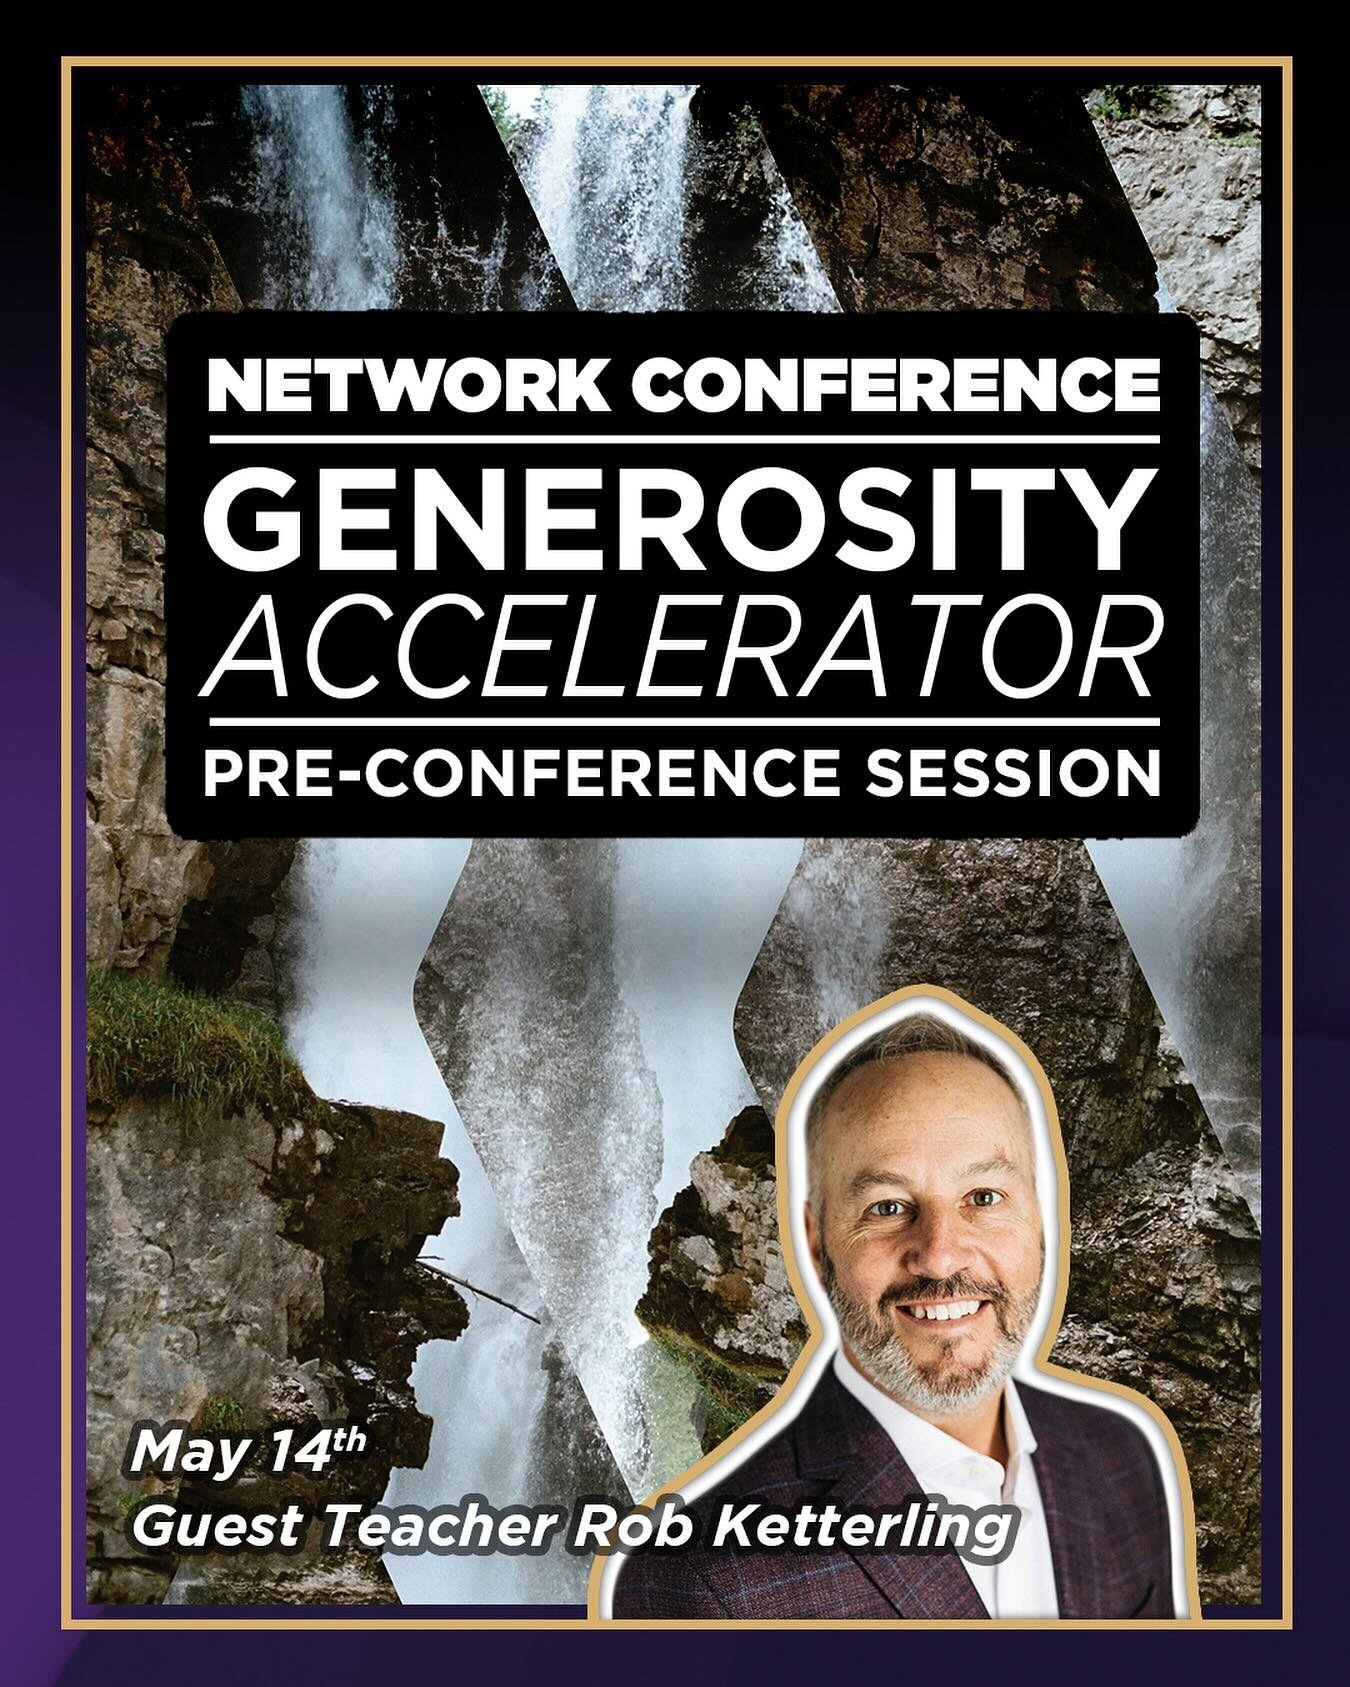 This year at Network Conference we are kicking things off with a FREE Pre-Conference Seminar with Rob Kettlerling who will be talking through a program they initiated called Generosity Accelerator. At Generosity Accelerator, you will learn how to gro